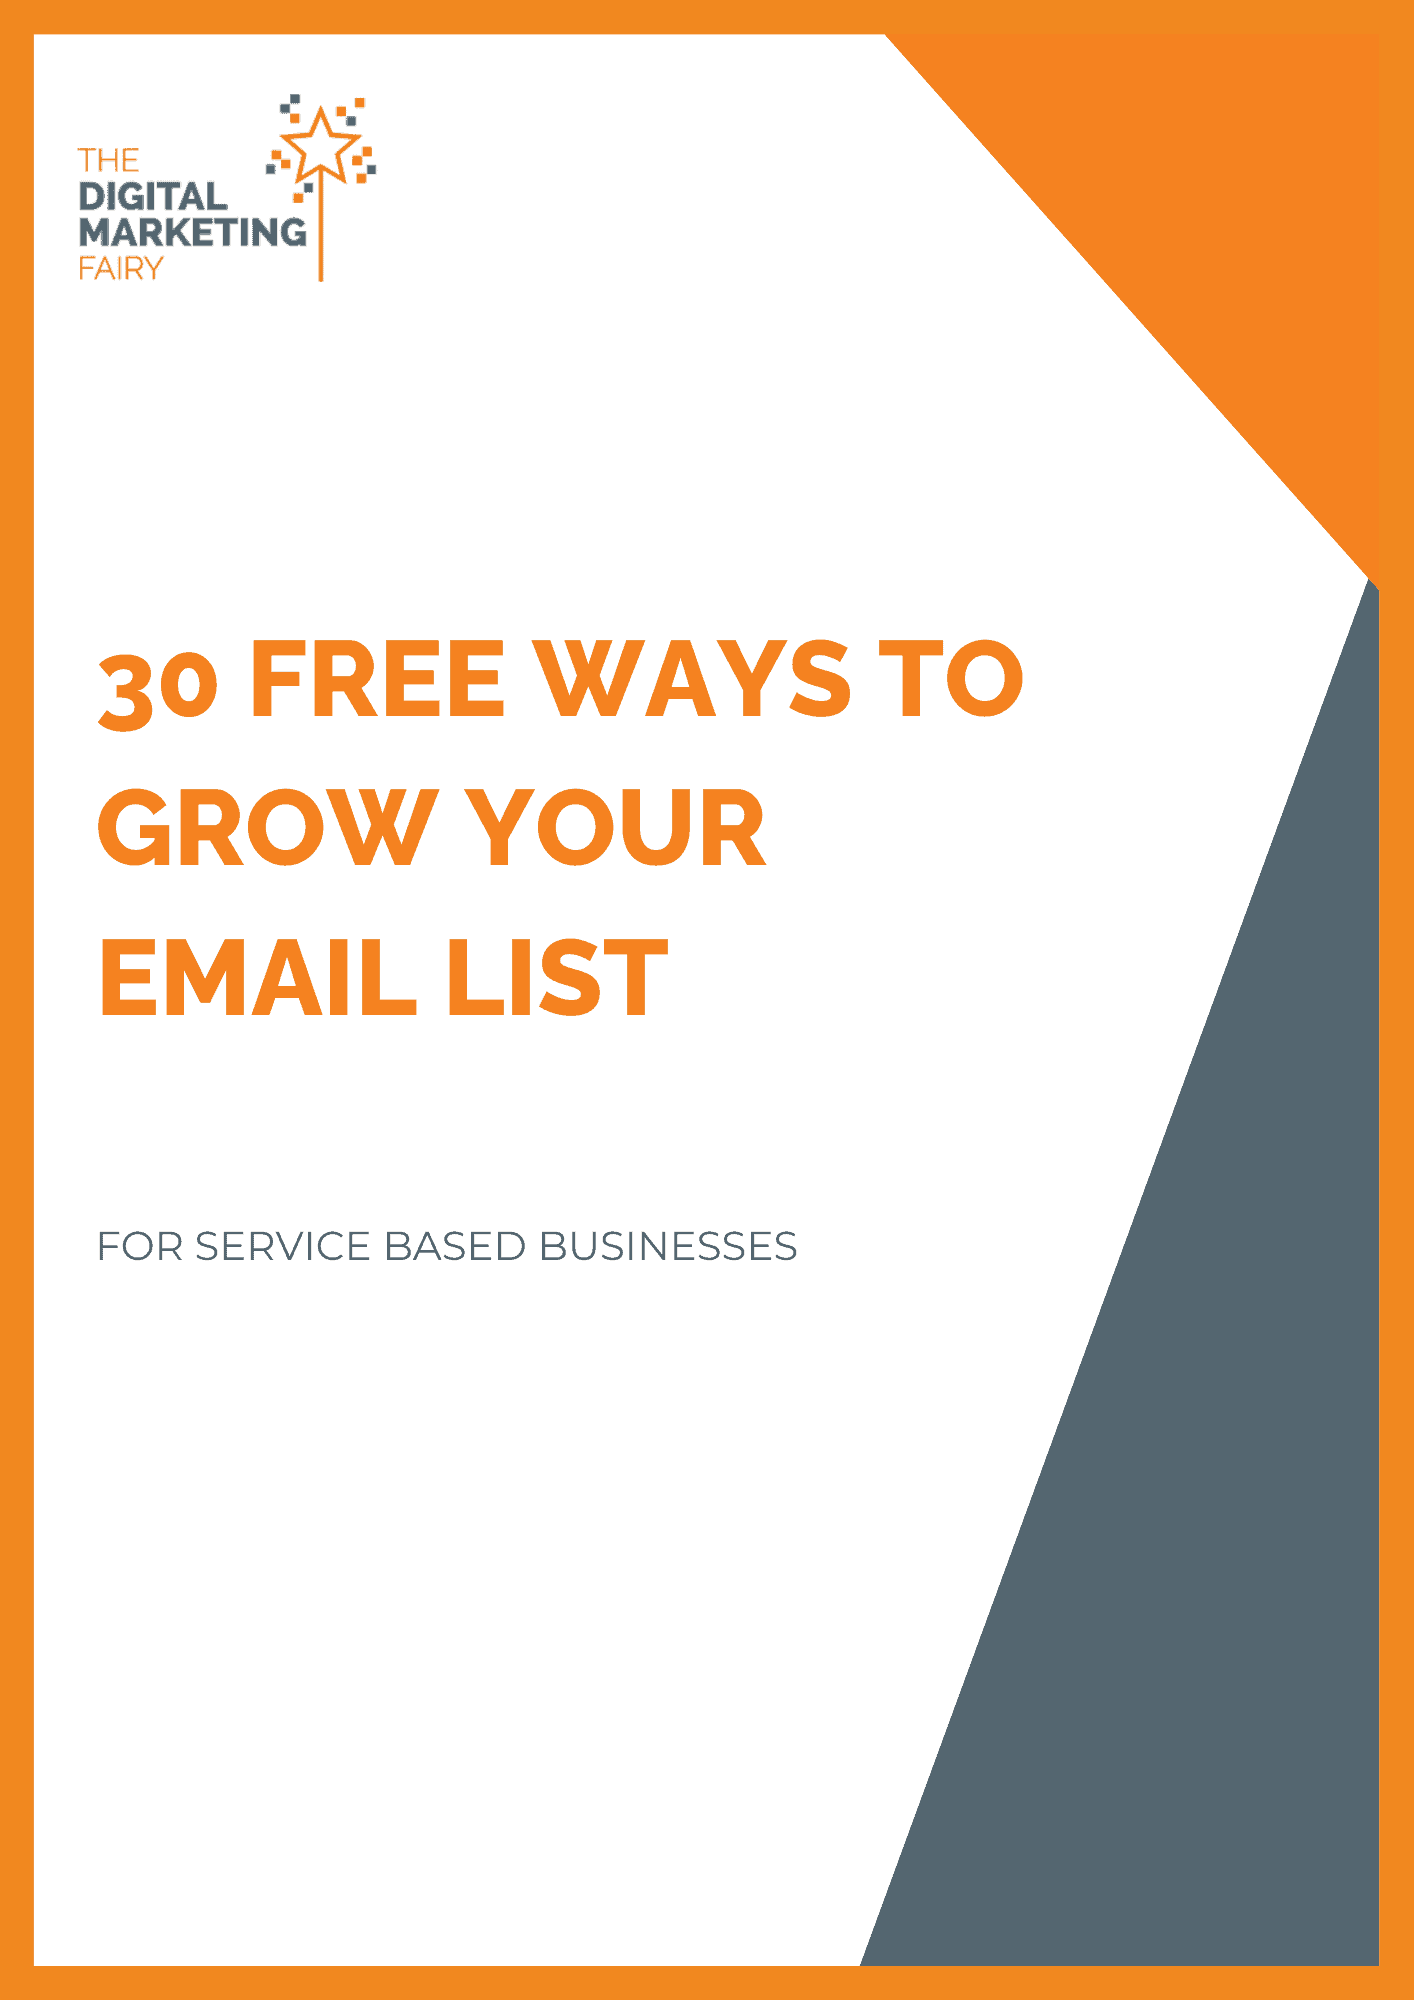 30 free ways to grow your email list guide